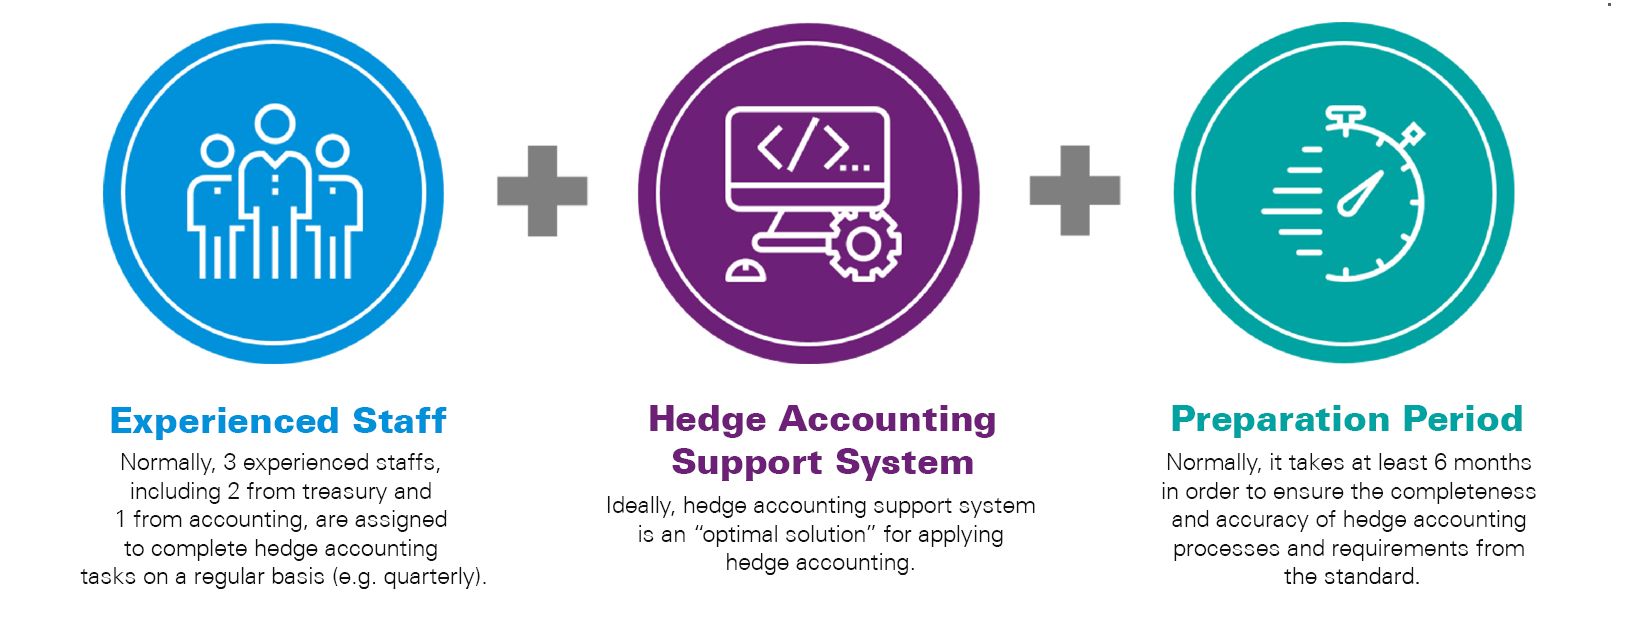 Hedge Accounting - Are you ready for it?